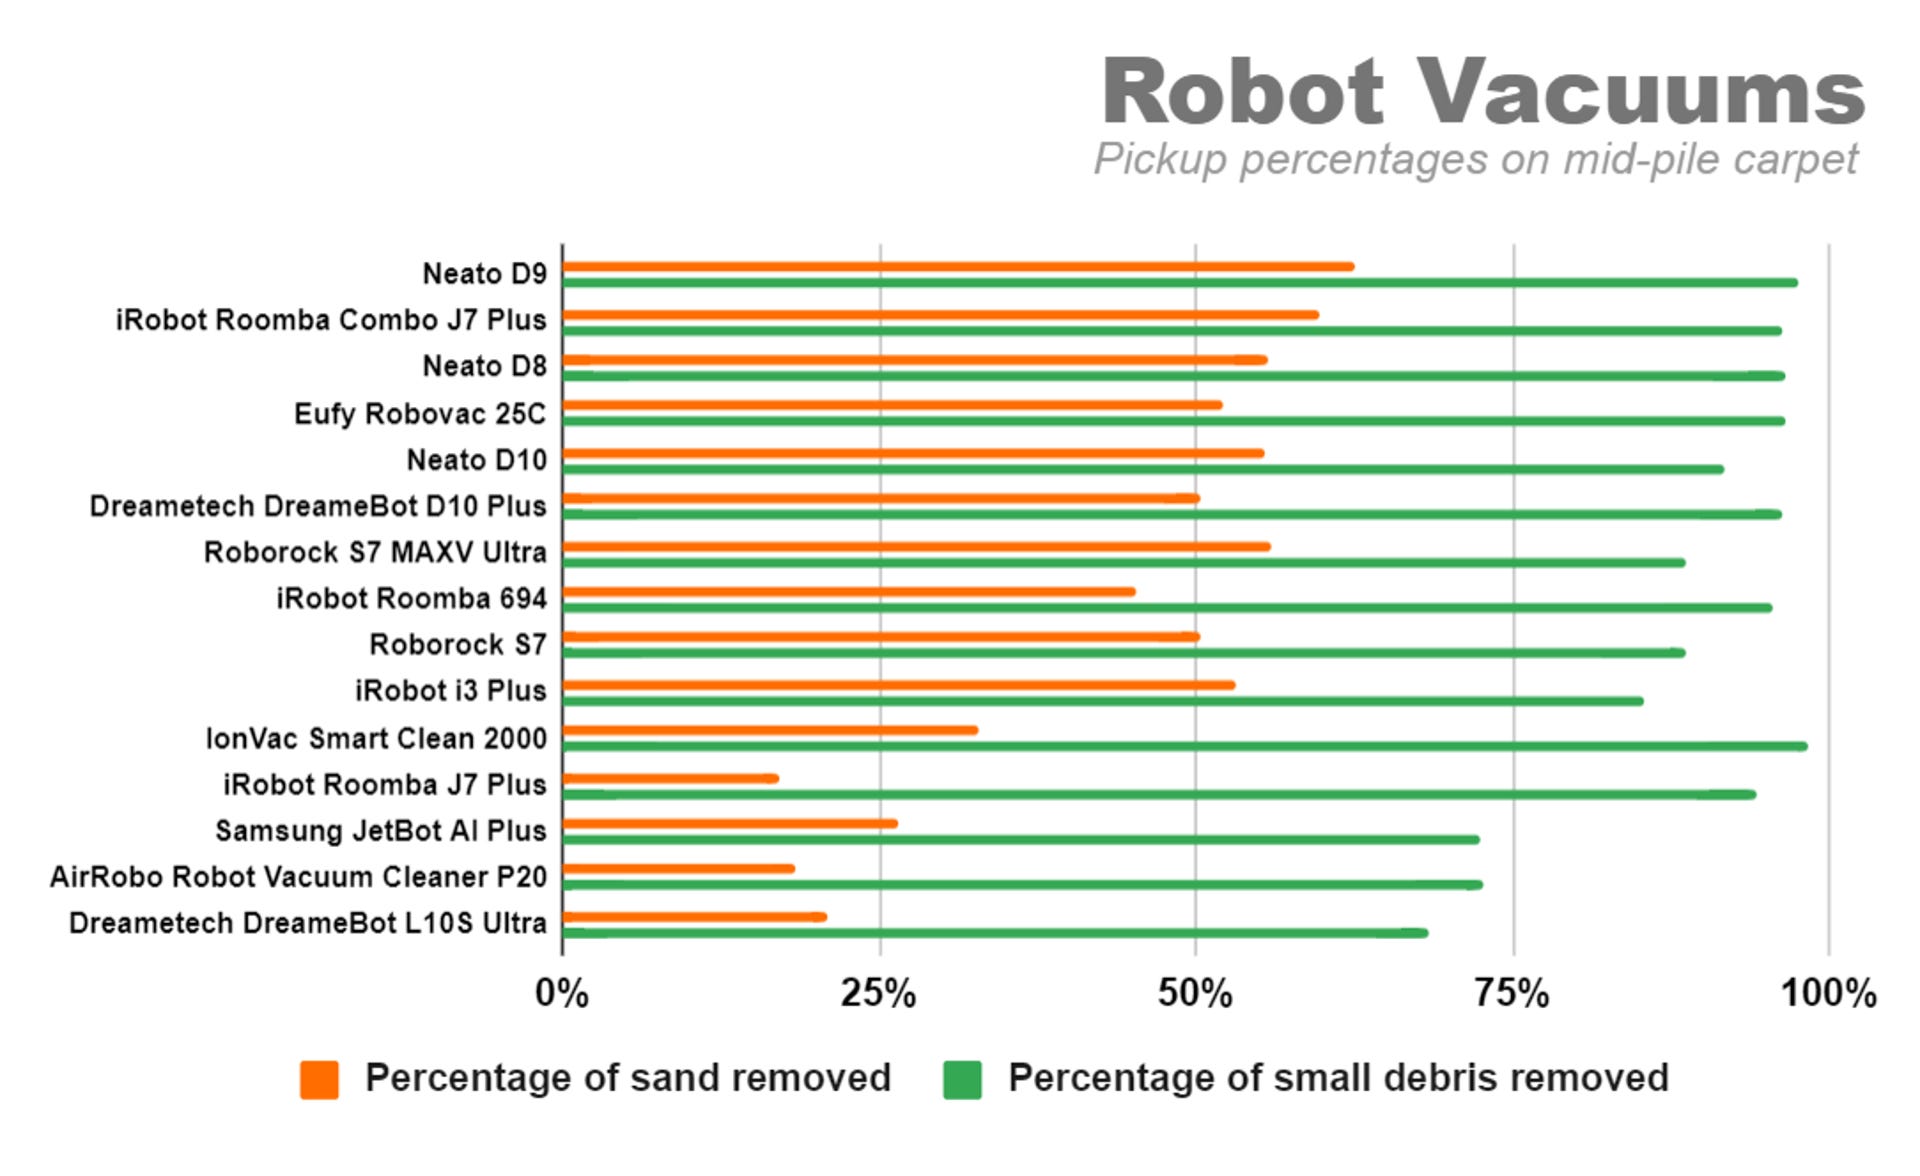 A bar graph lists fifteen robot vacuums according to their CNET-tested pickup percentages of small debris and fine particles on plushy, mid-pile carpet. The Neato D9 picked up the most of both kinds of debris among all of the cleaners tested. Right behind it in second and third place are the iRobot Combo J7 Plus and the Neato D8, respectively.